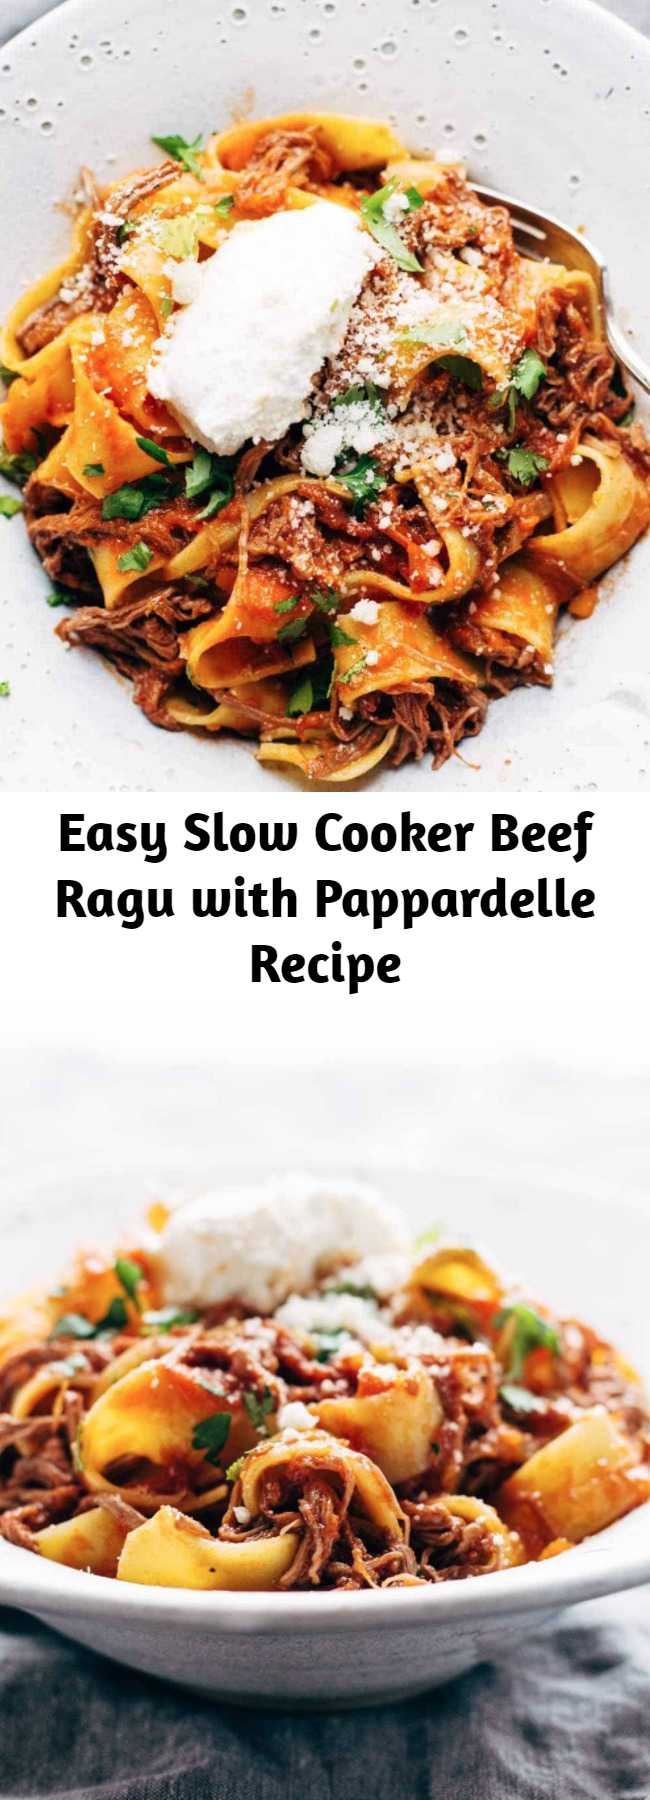 Easy Slow Cooker Beef Ragu with Pappardelle Recipe - Easy comfort food. We’re making this cozy, comforting Beef Ragu with Pappardelle! Steak is braised in the crockpot for hours with garlic, tomatoes, veggies, and herbs, then shredded and piled high on pappardelle with Parm cheese. #pasta #pappardelle #brunch